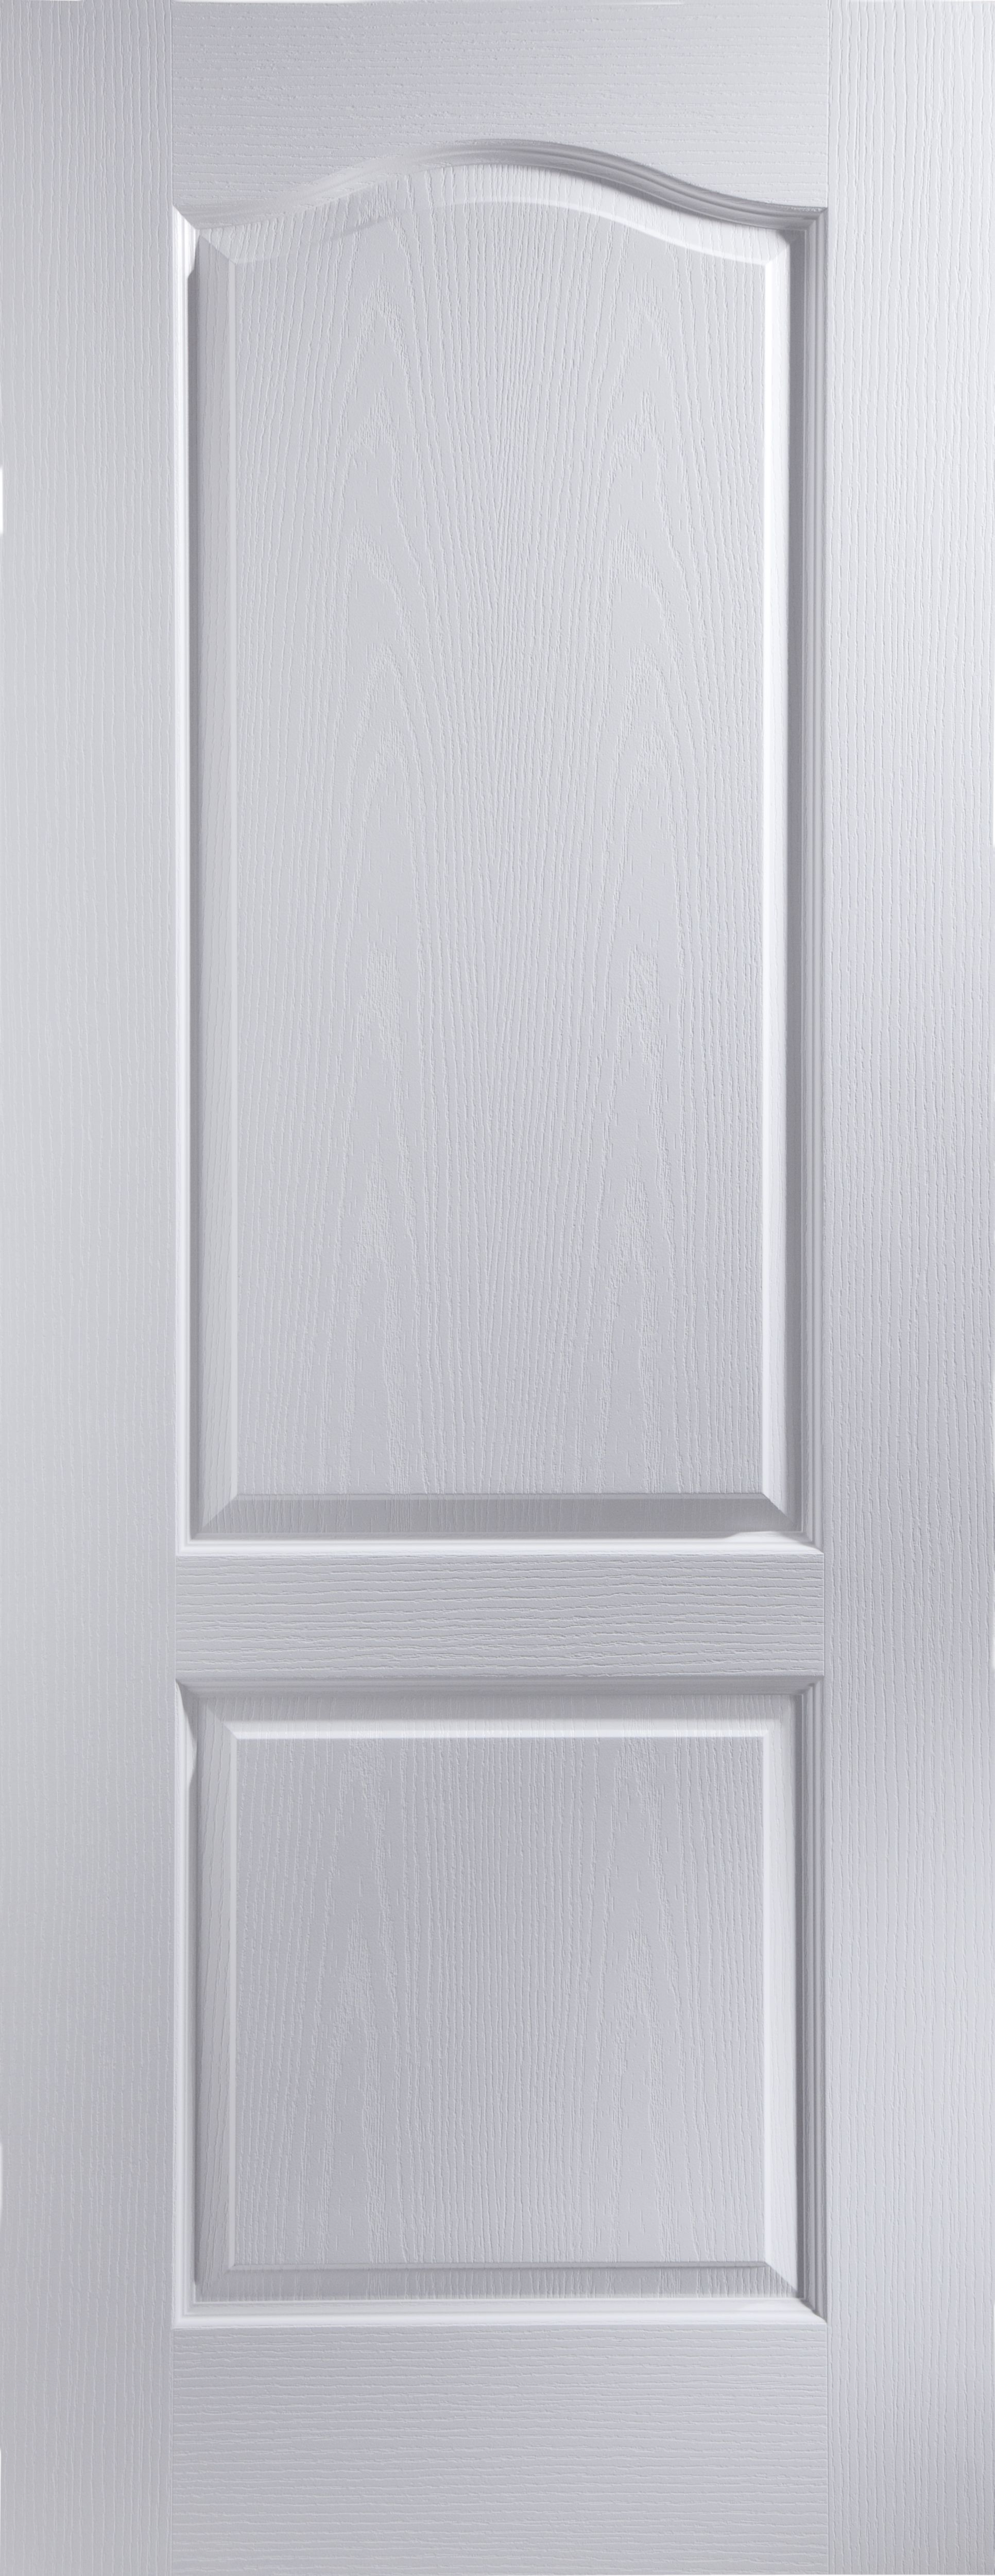 Arched 2 panel Unglazed Arched White Woodgrain effect Internal Door, (H)1981mm (W)838mm (T)35mm